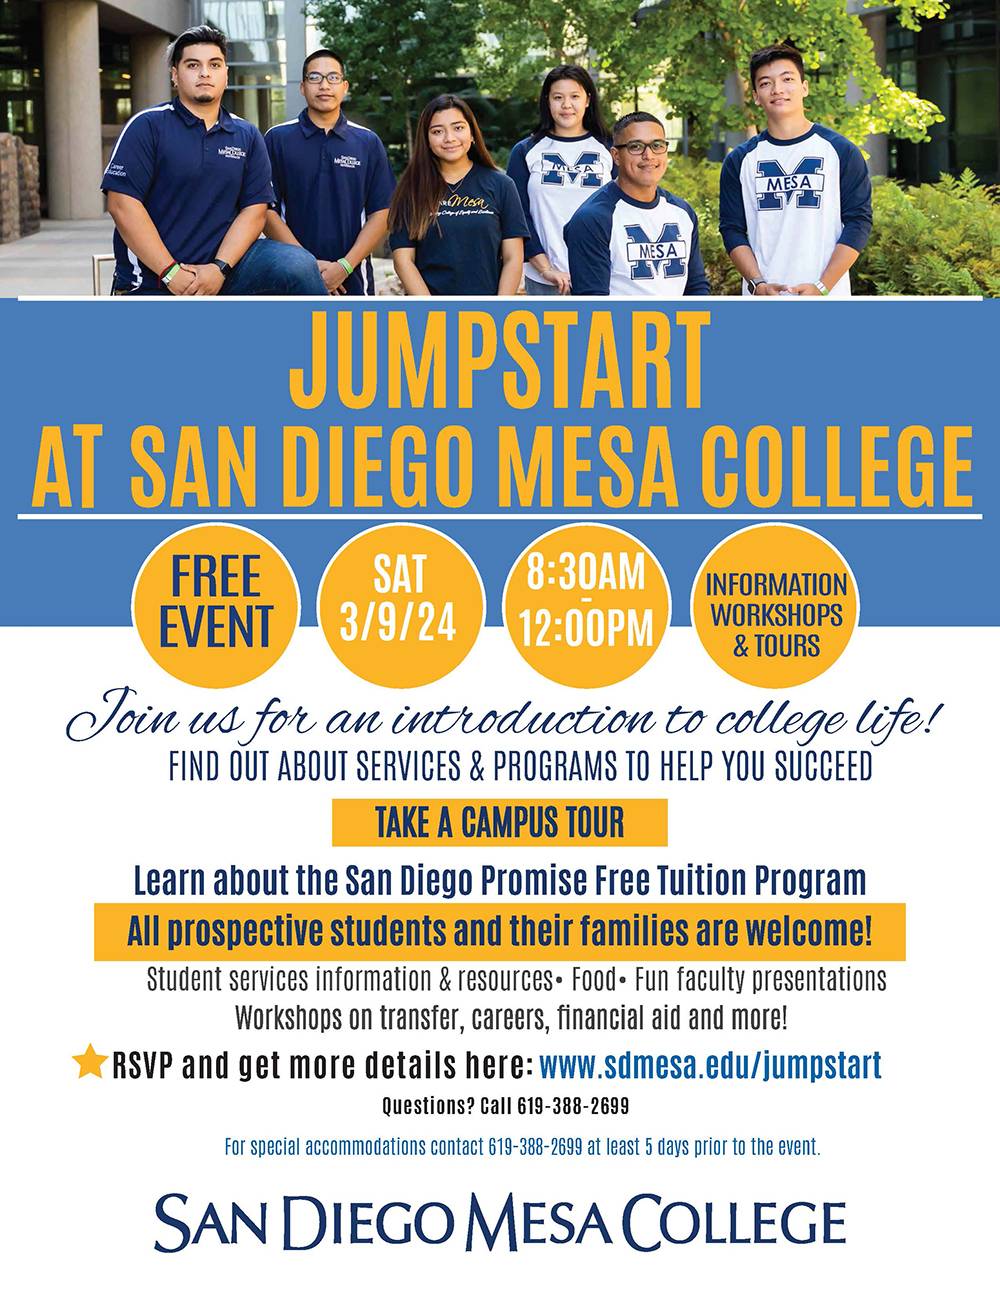 Future students can learn about Mesa College at jumpstart event on March 9 Featured Image